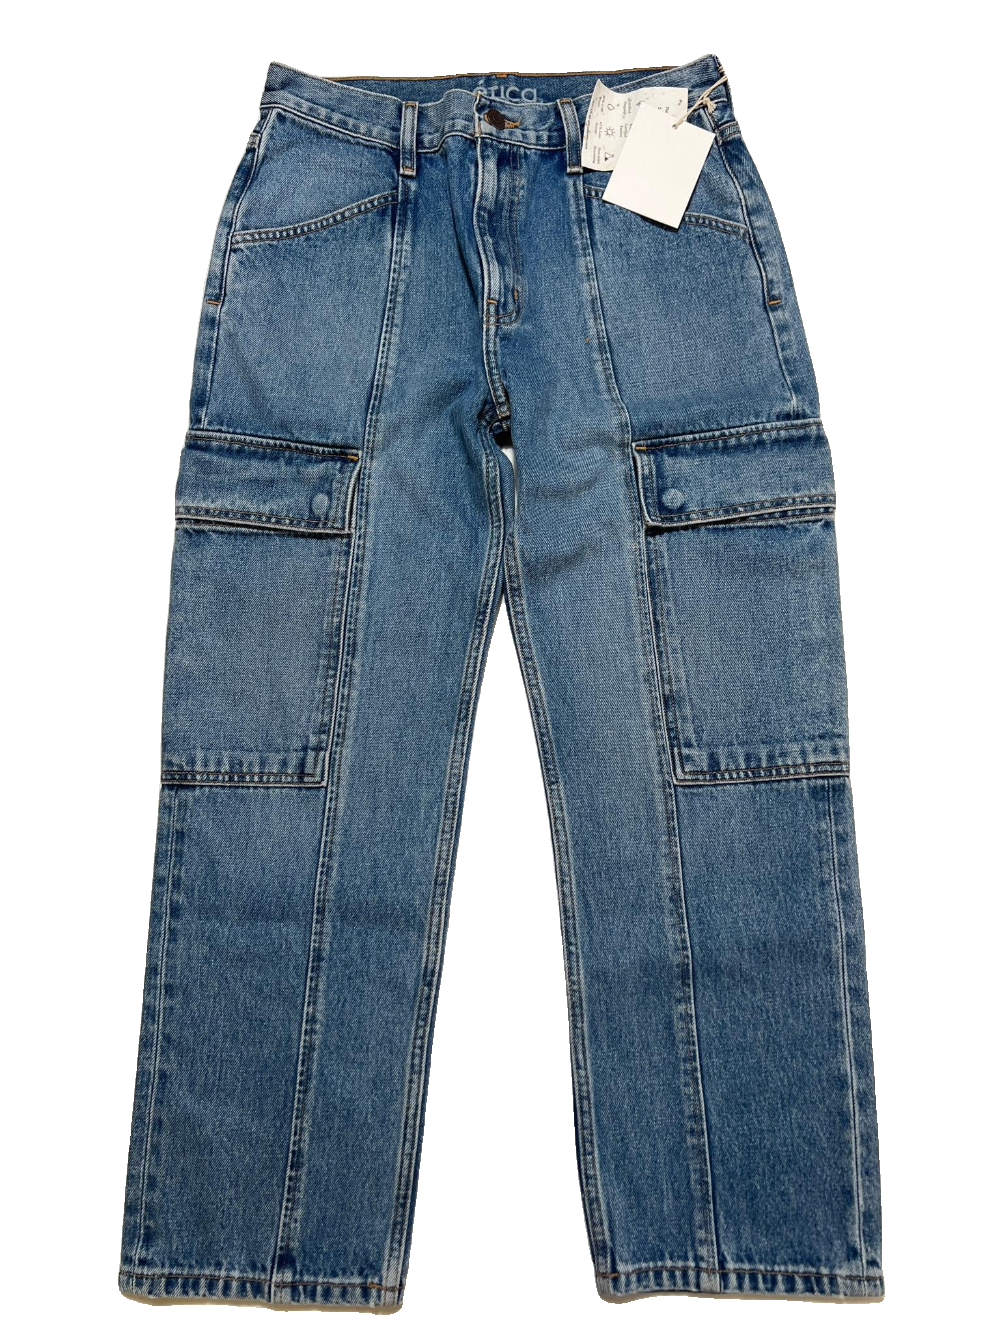 Etica- Blue Pocket Jeans NEW WITH TAGS